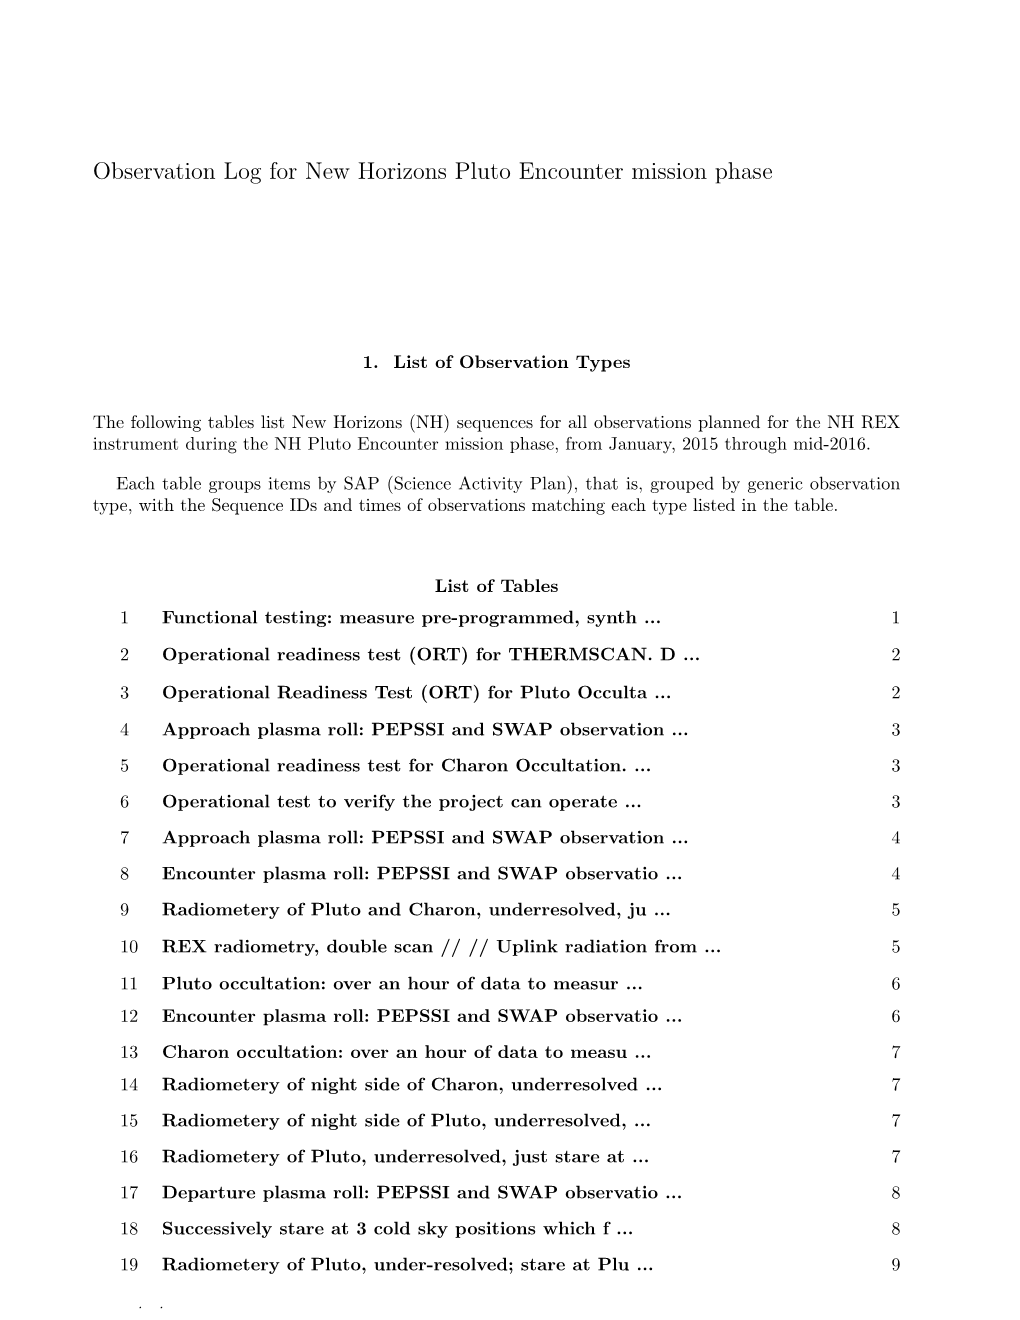 Observation Log for New Horizons Pluto Encounter Mission Phase